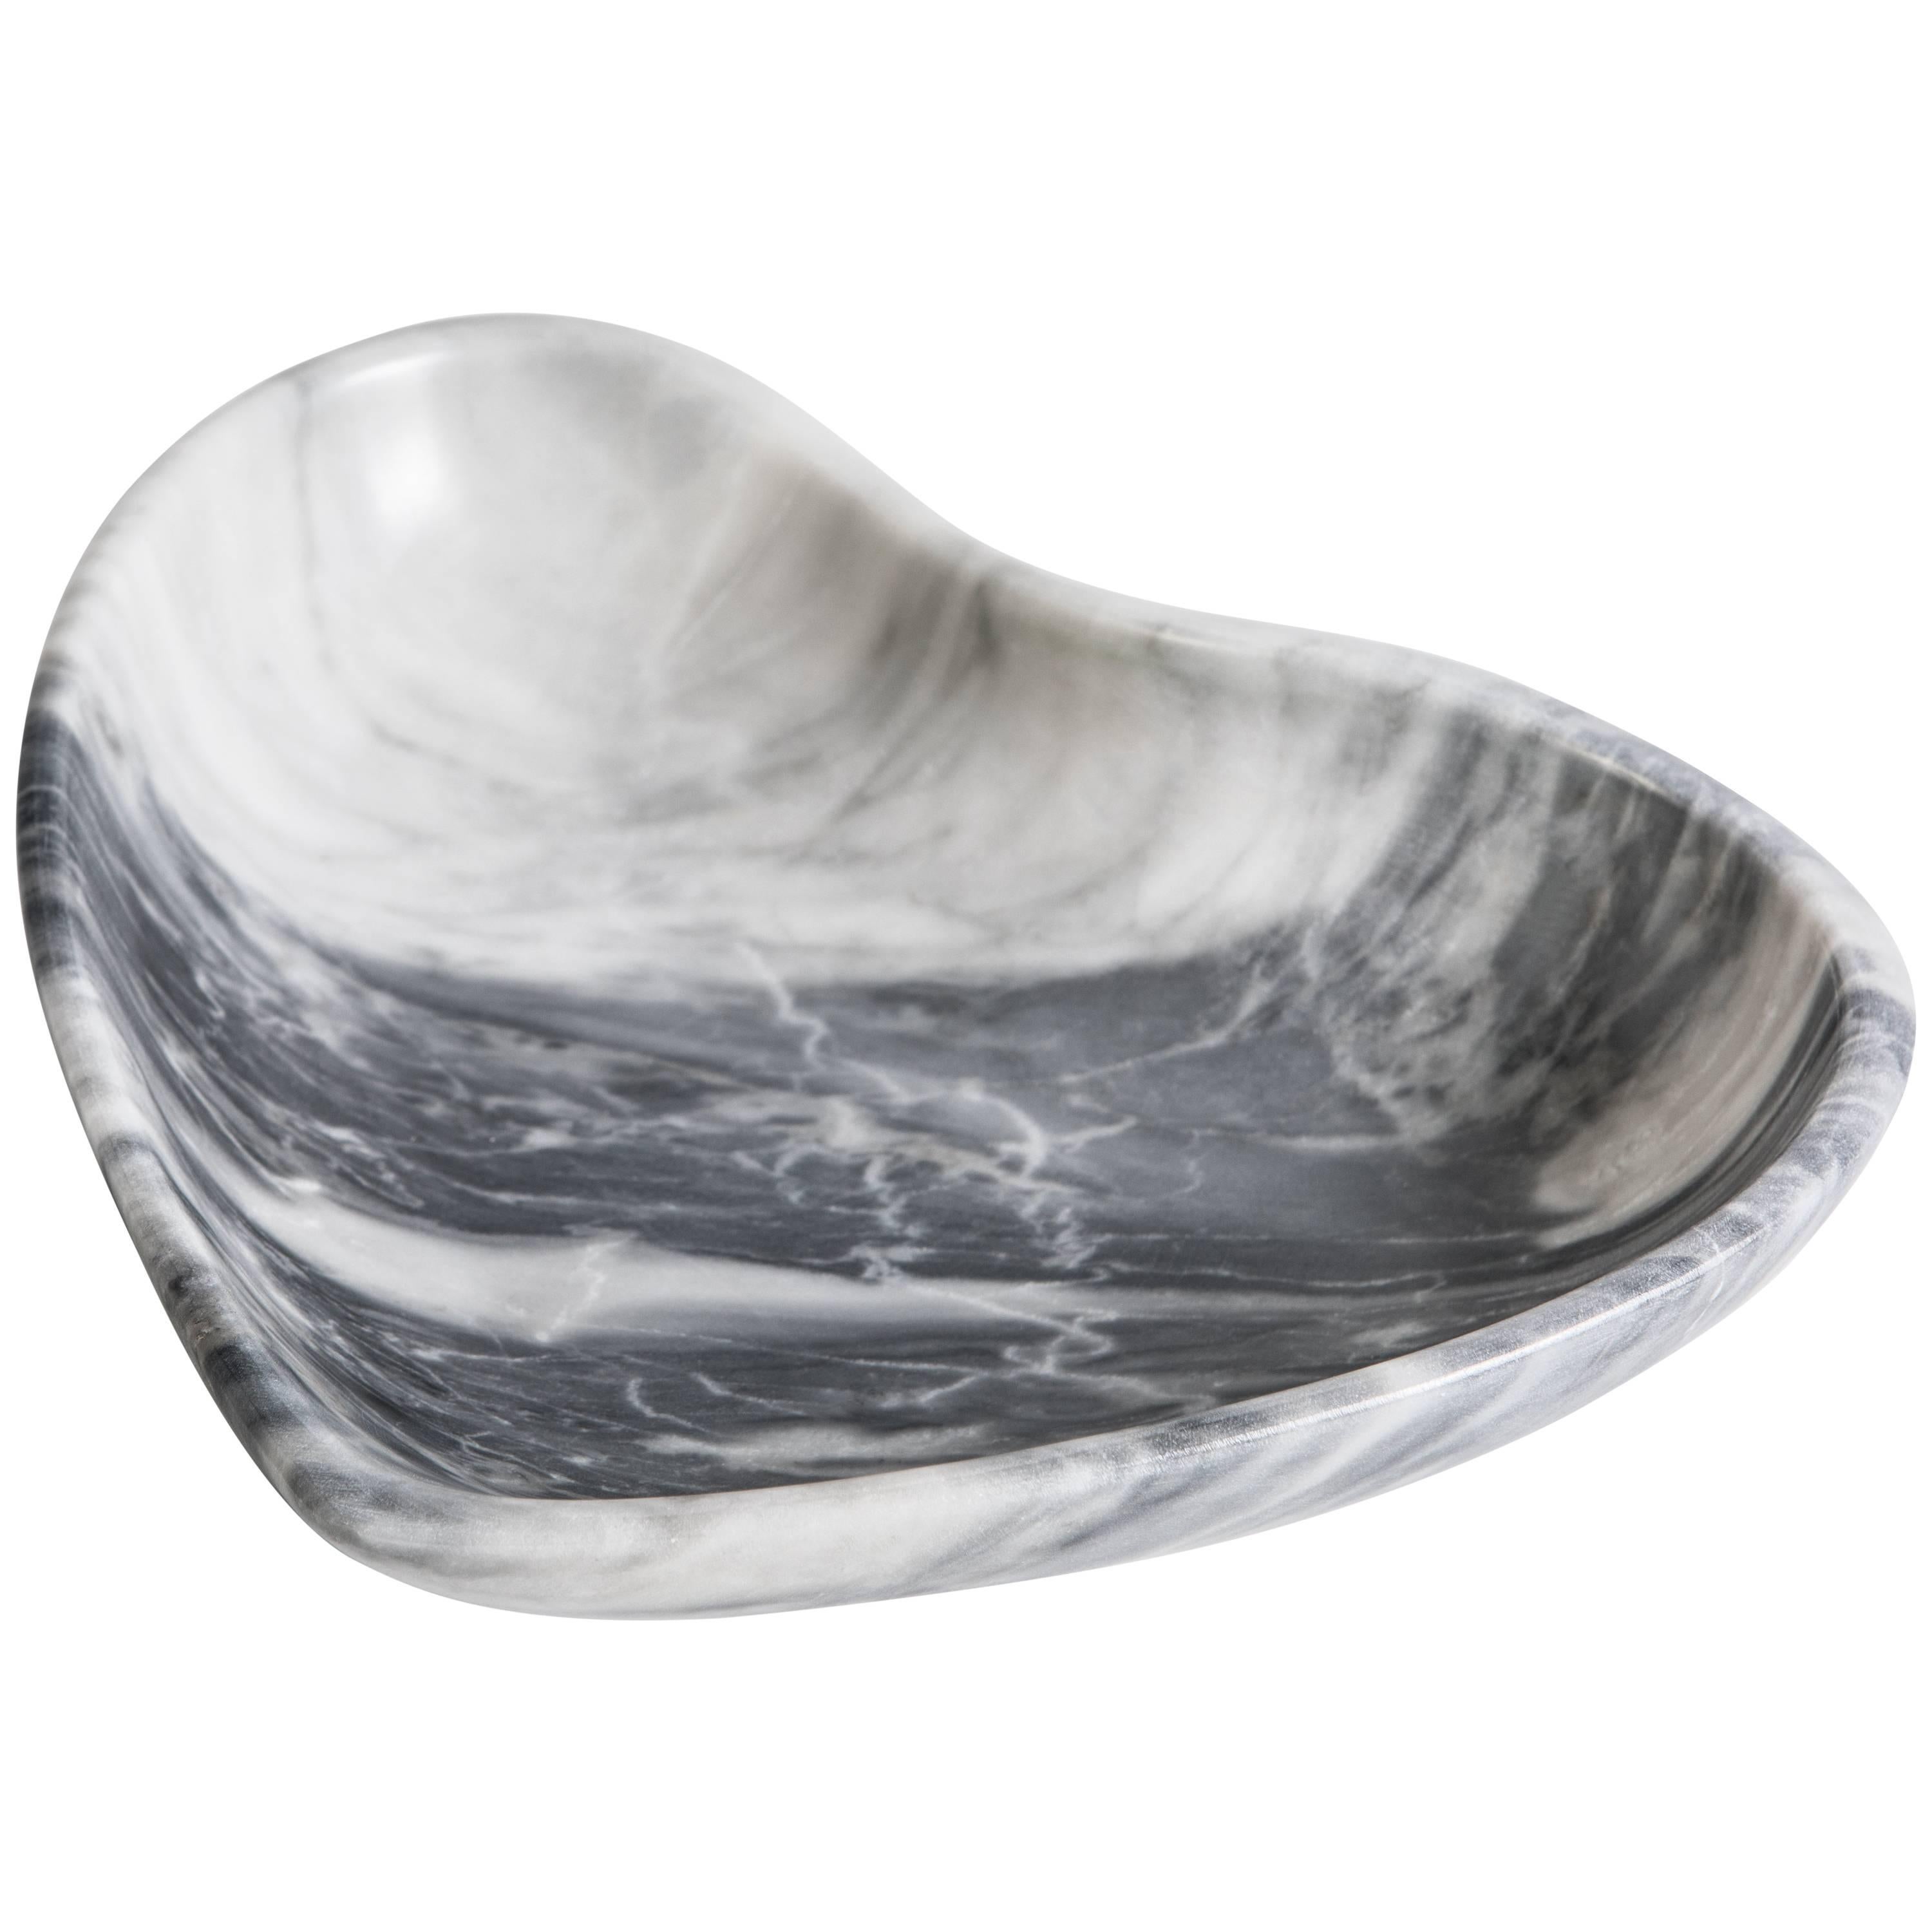 Small Heart Bowl in Grey Marble Handmade in Italy